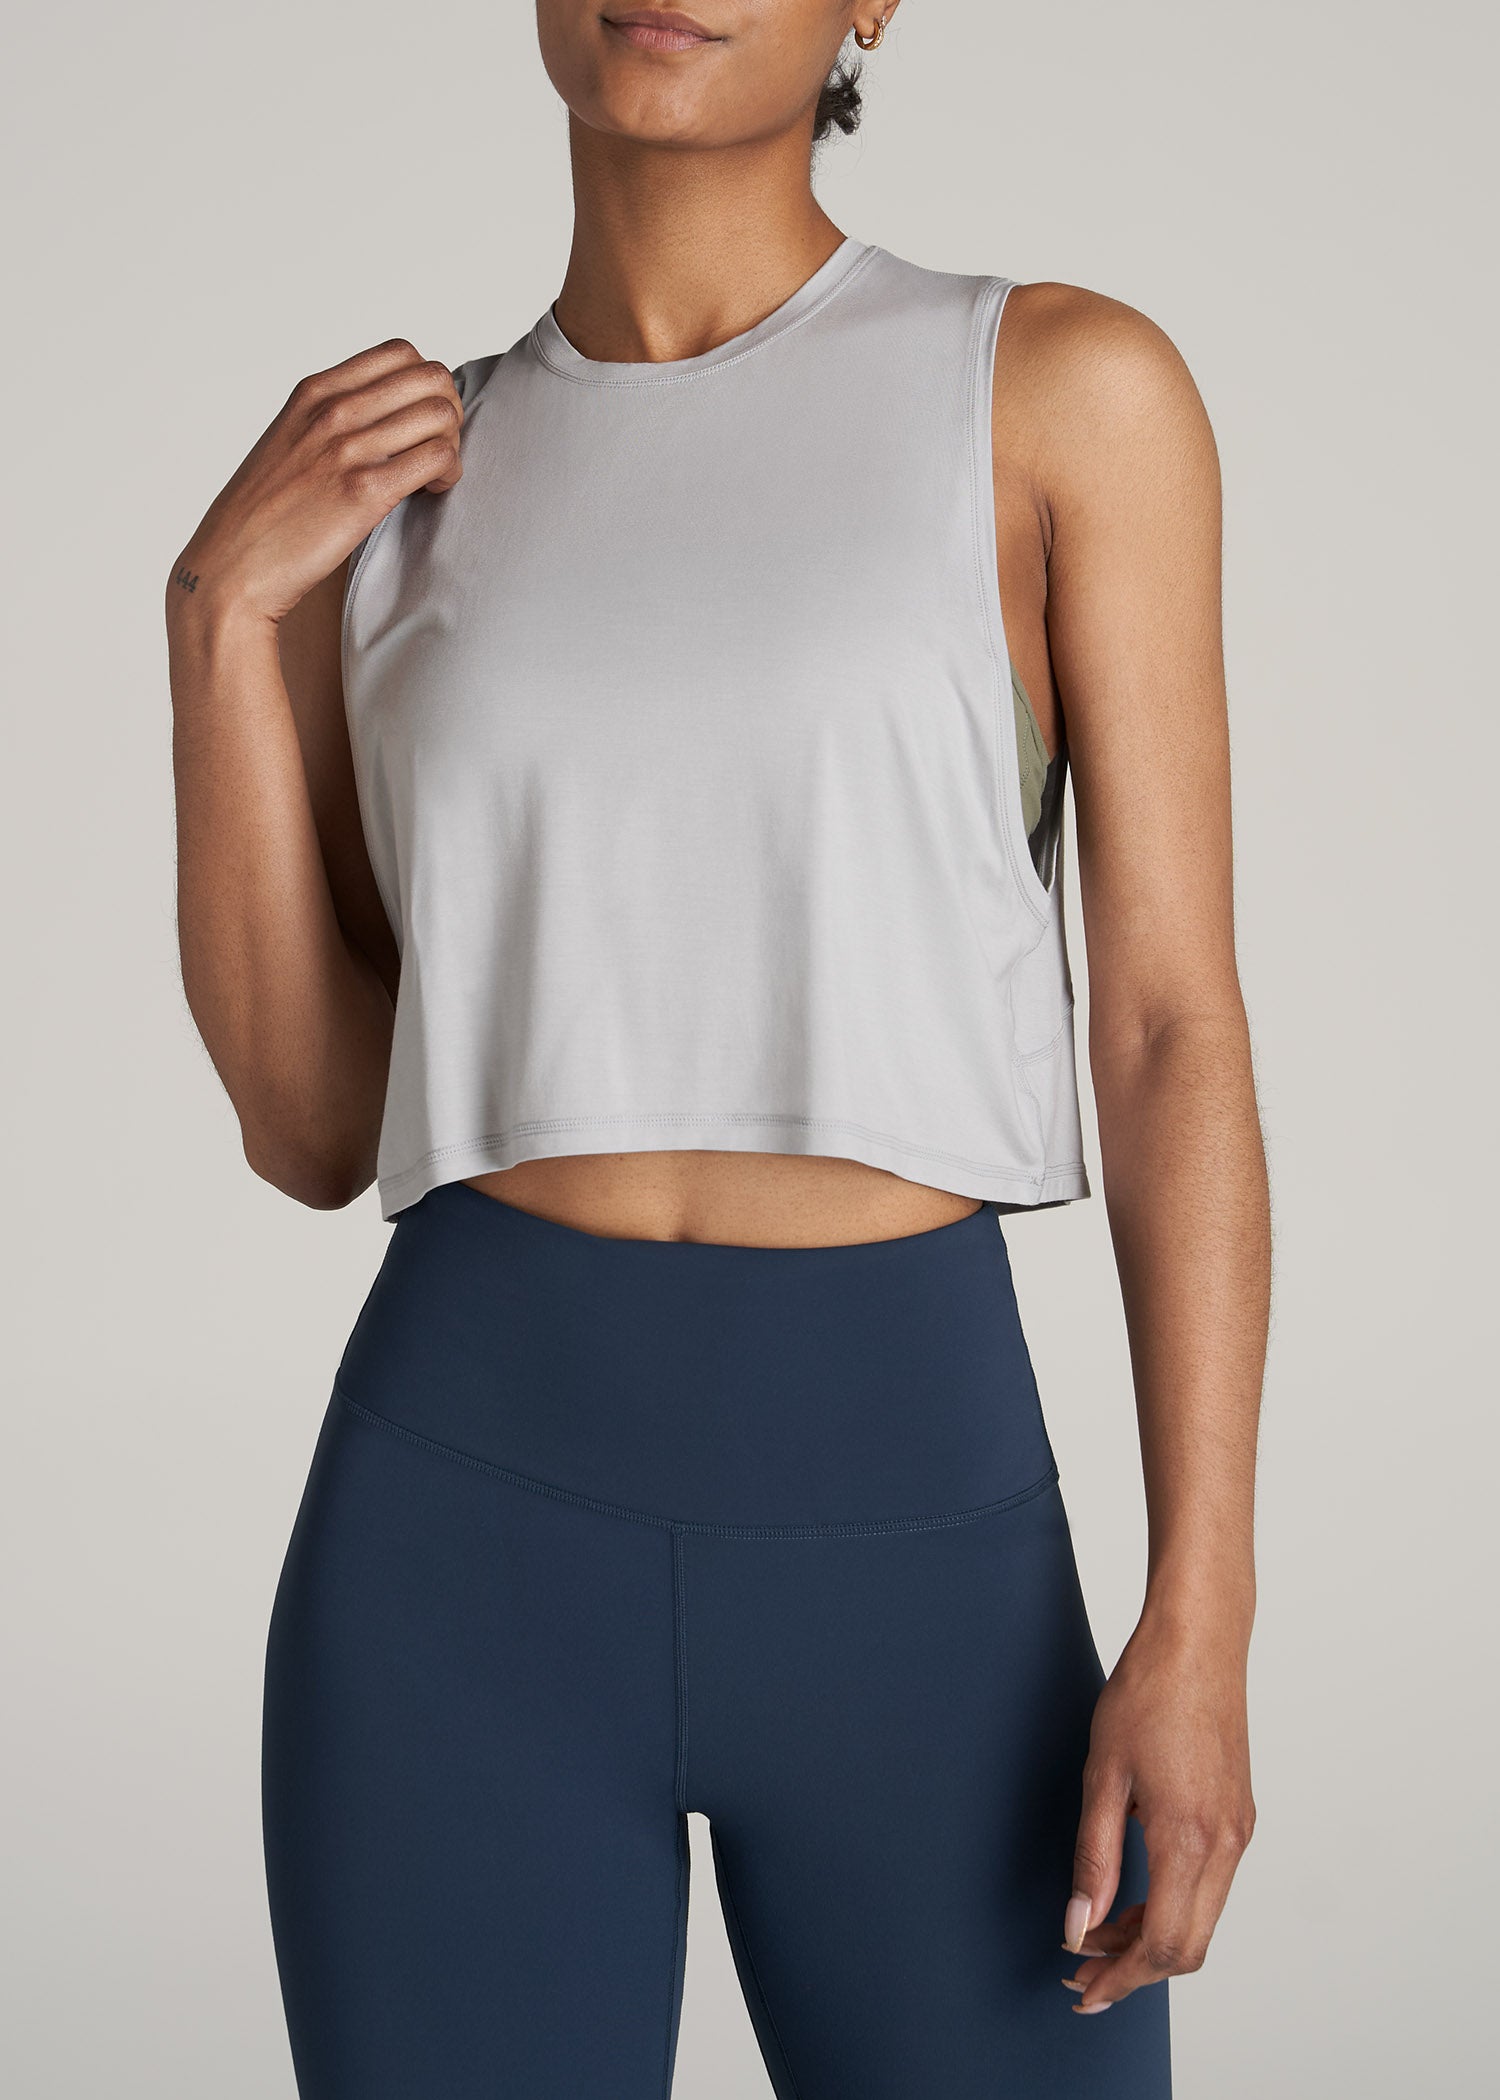 Athletic Cropped Muscle Tank Top for Tall Women in Grey Mix